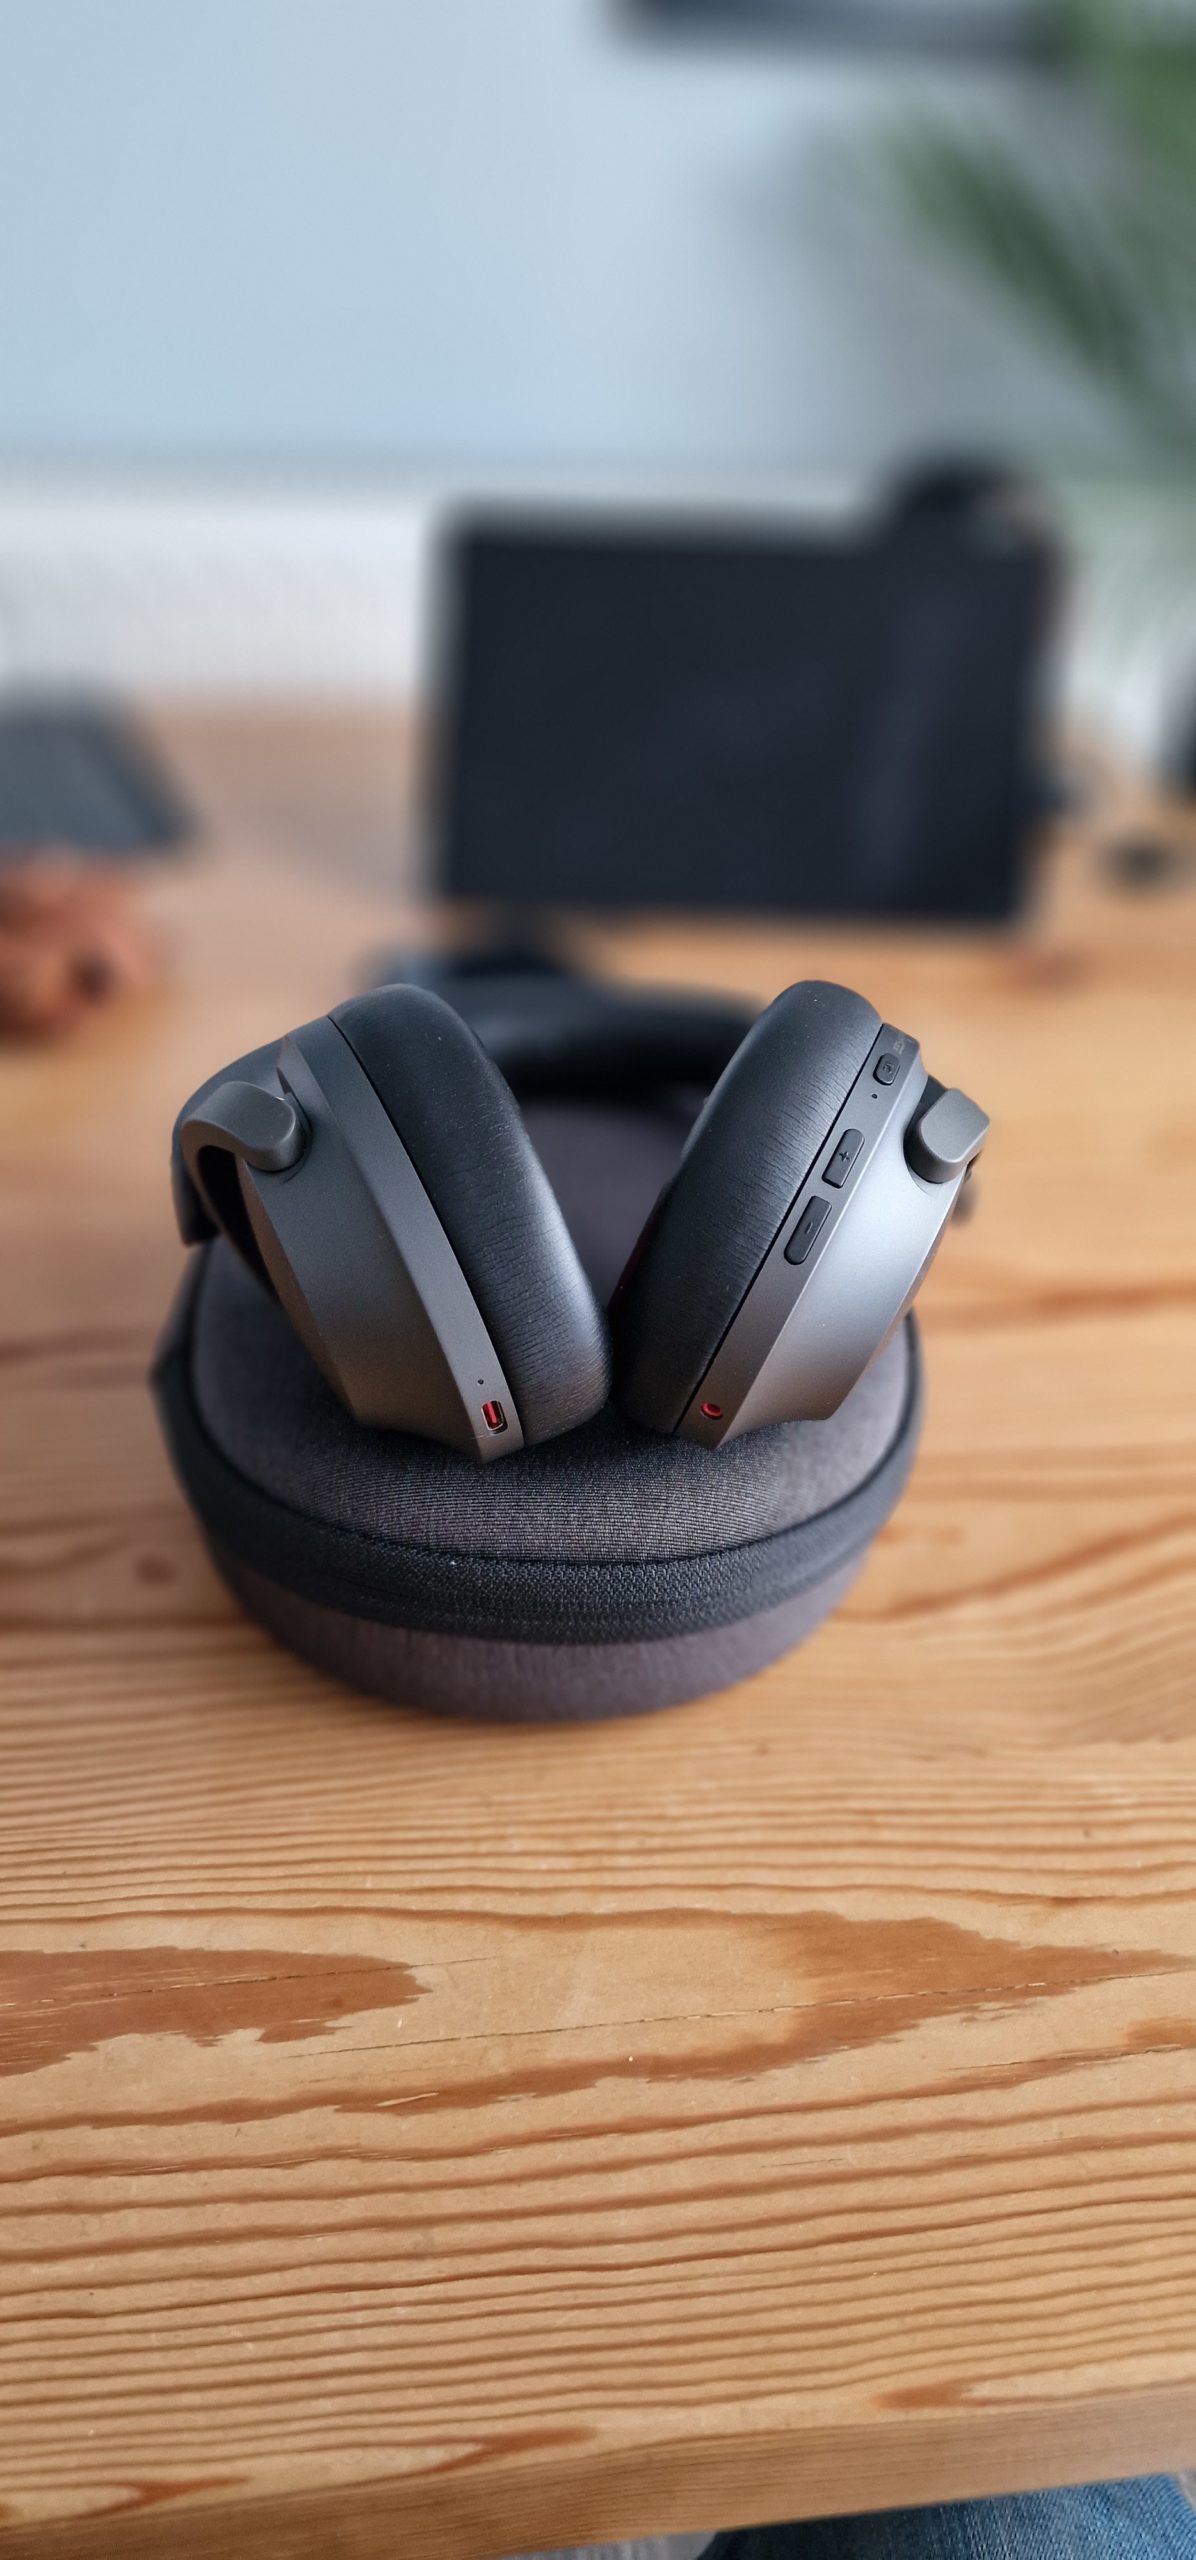 1More Sonoflow review: These are the best headphones under $100